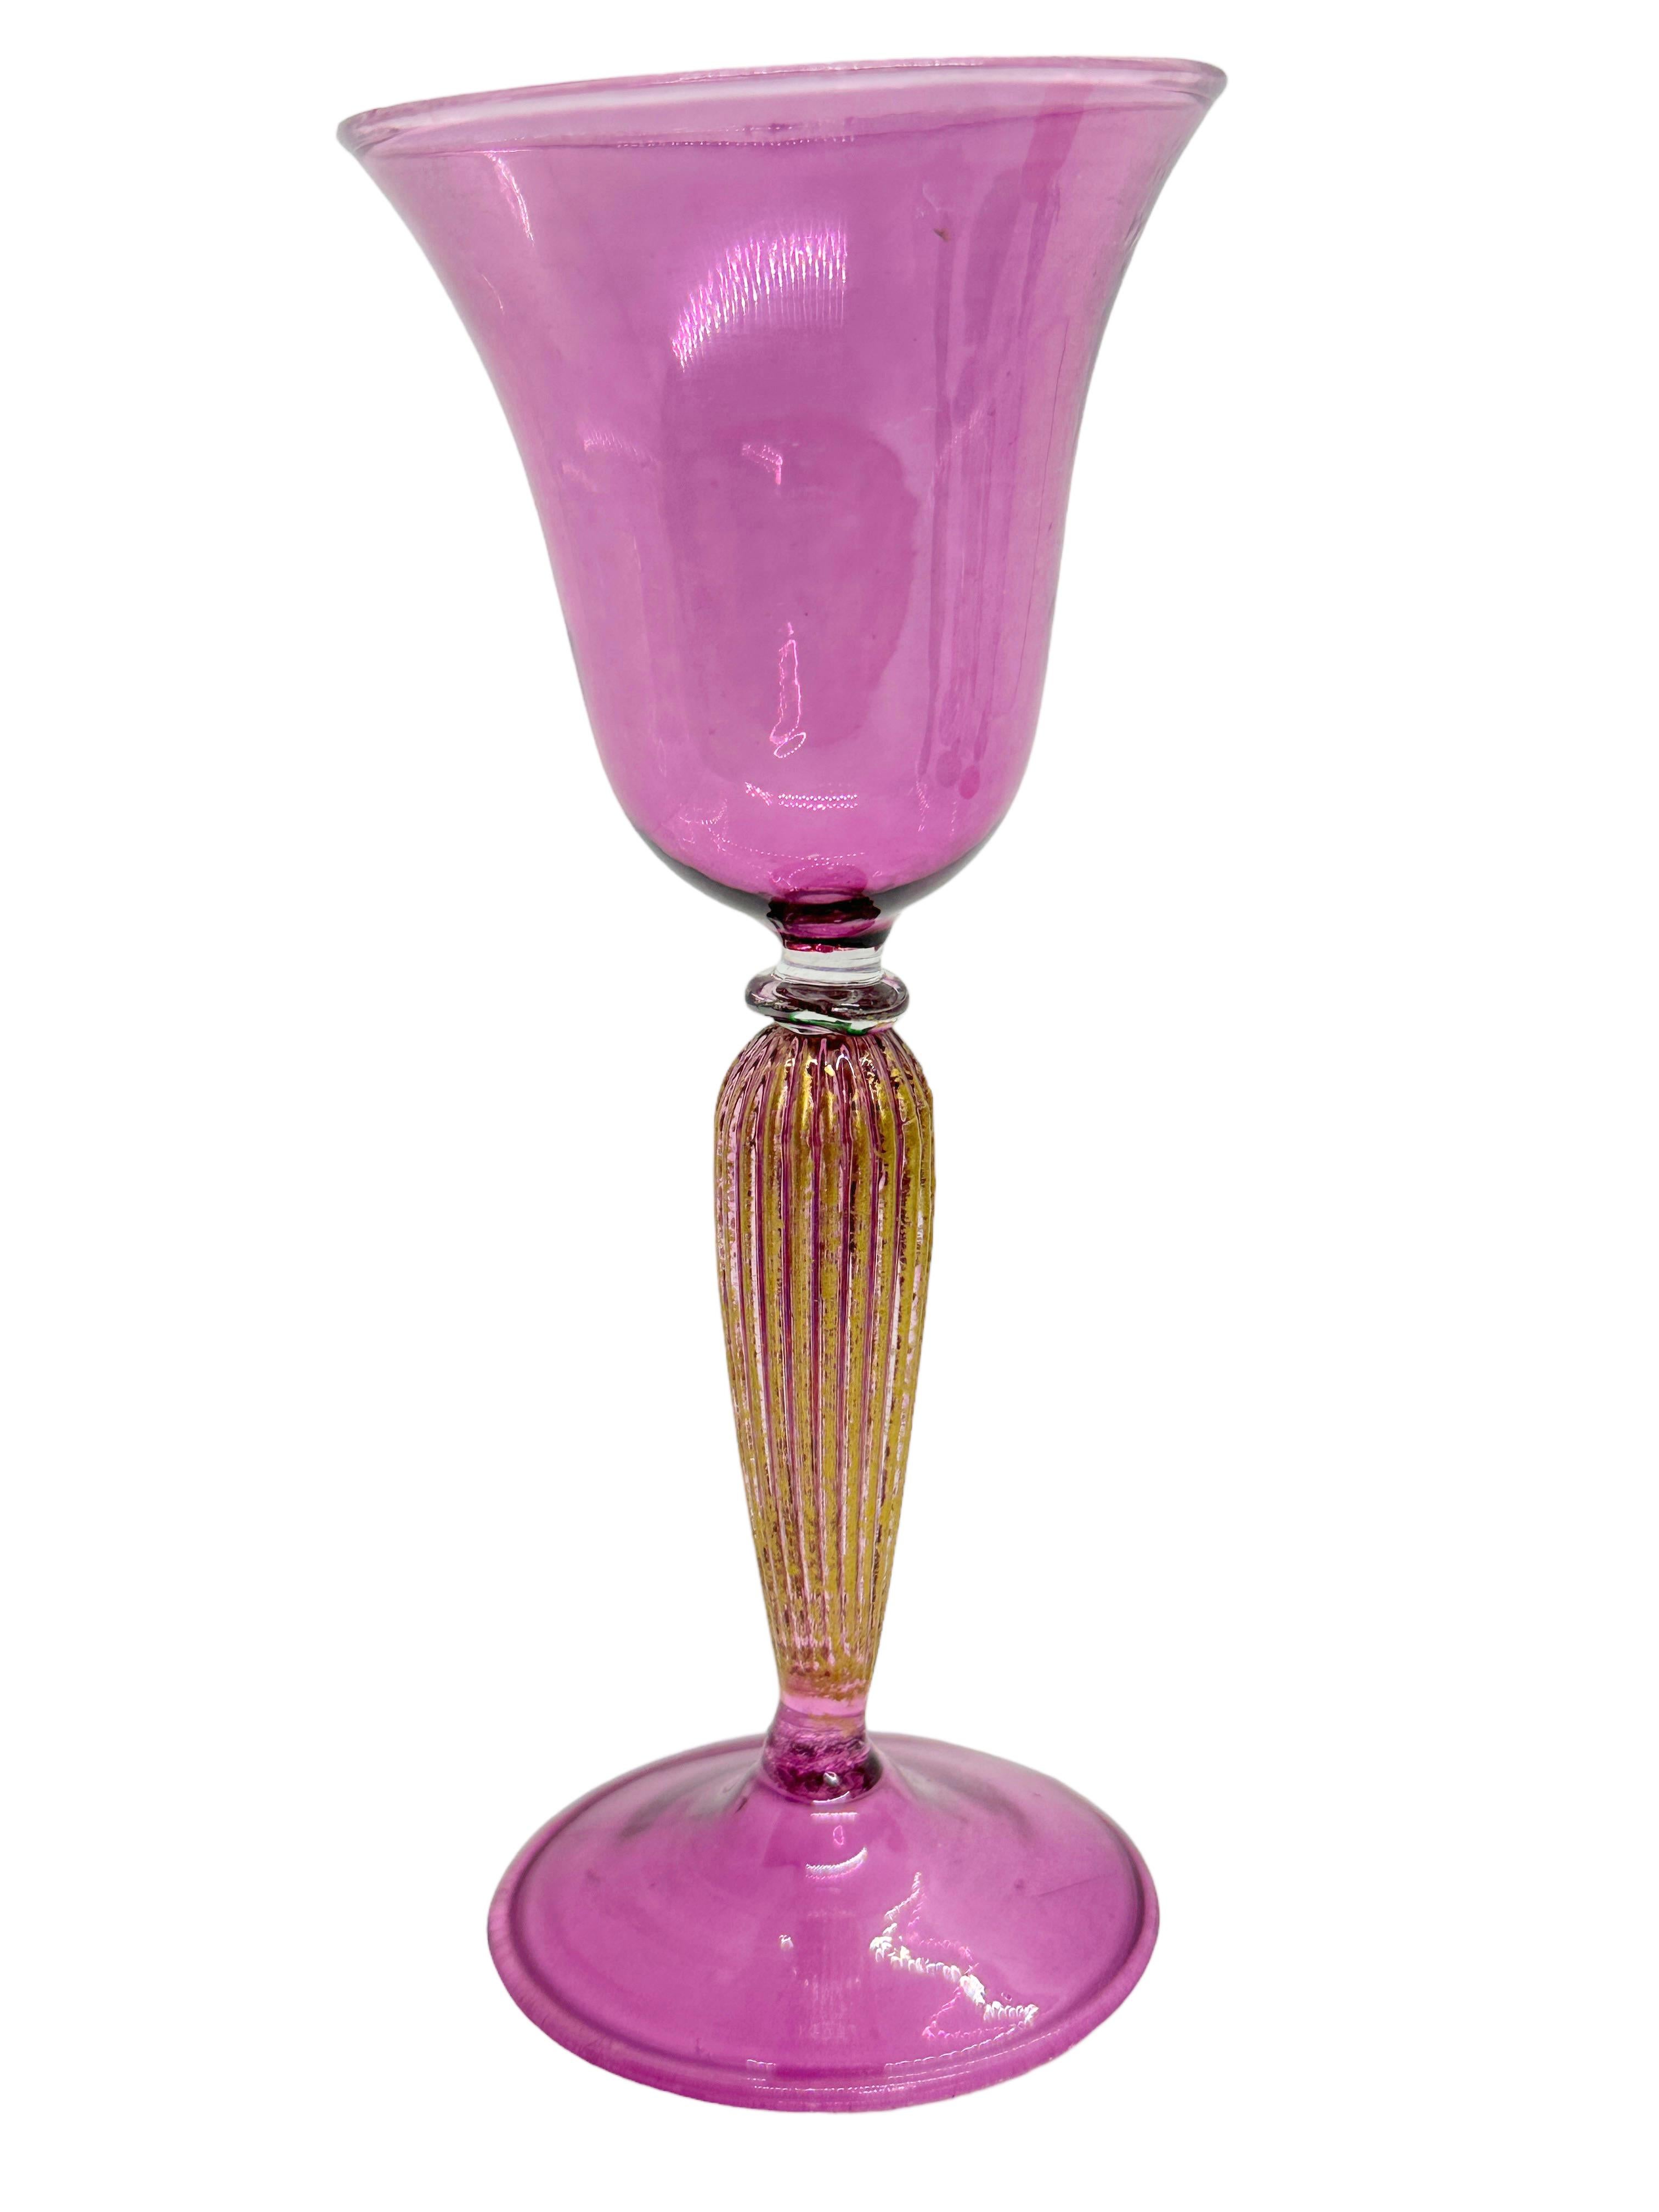 Purple & Gold Stardust Salviati Murano Glass Liqueur Goblet, Vintage Italy  In Good Condition For Sale In Nuernberg, DE